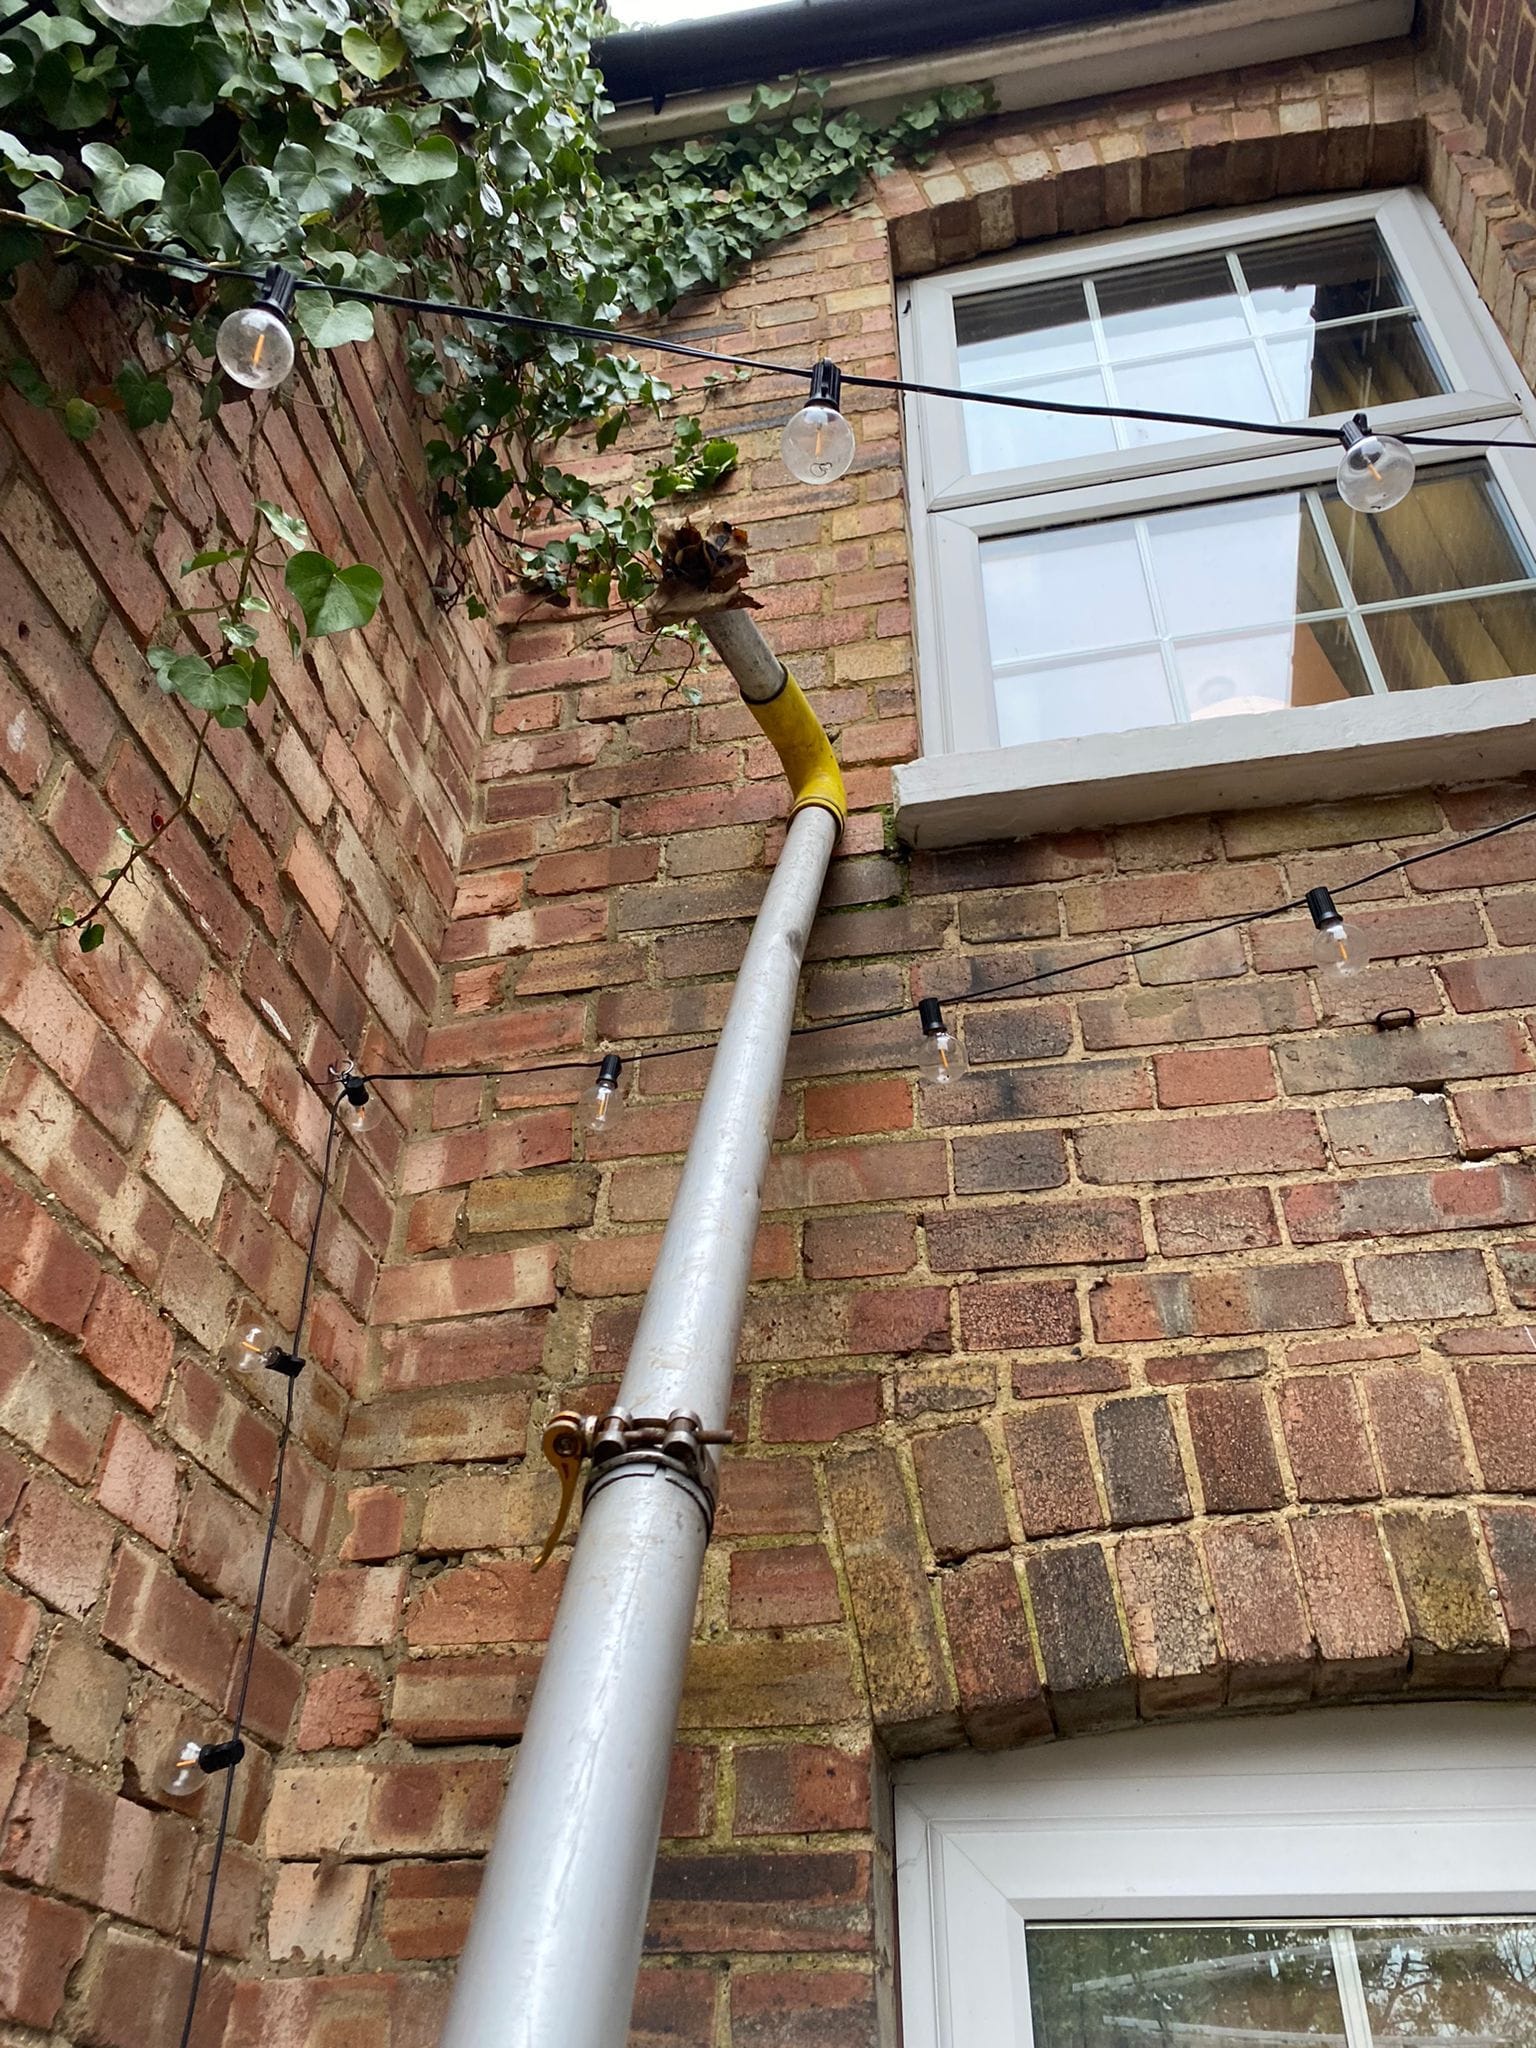 Gutter cleaning pole reaching debris out of pipes safely